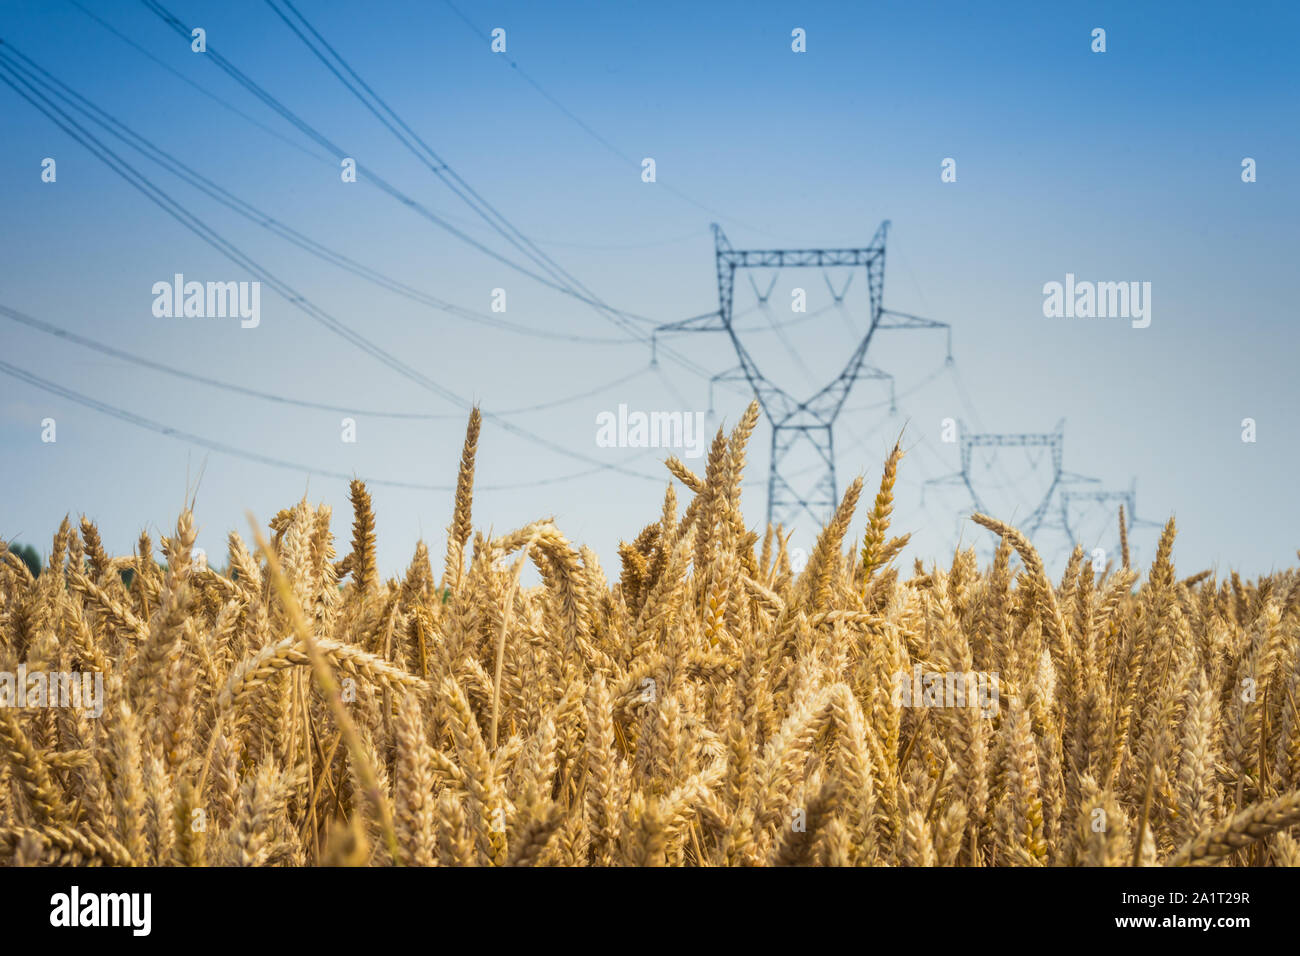 Pylons of Electricity power grid in wheat field Stock Photo